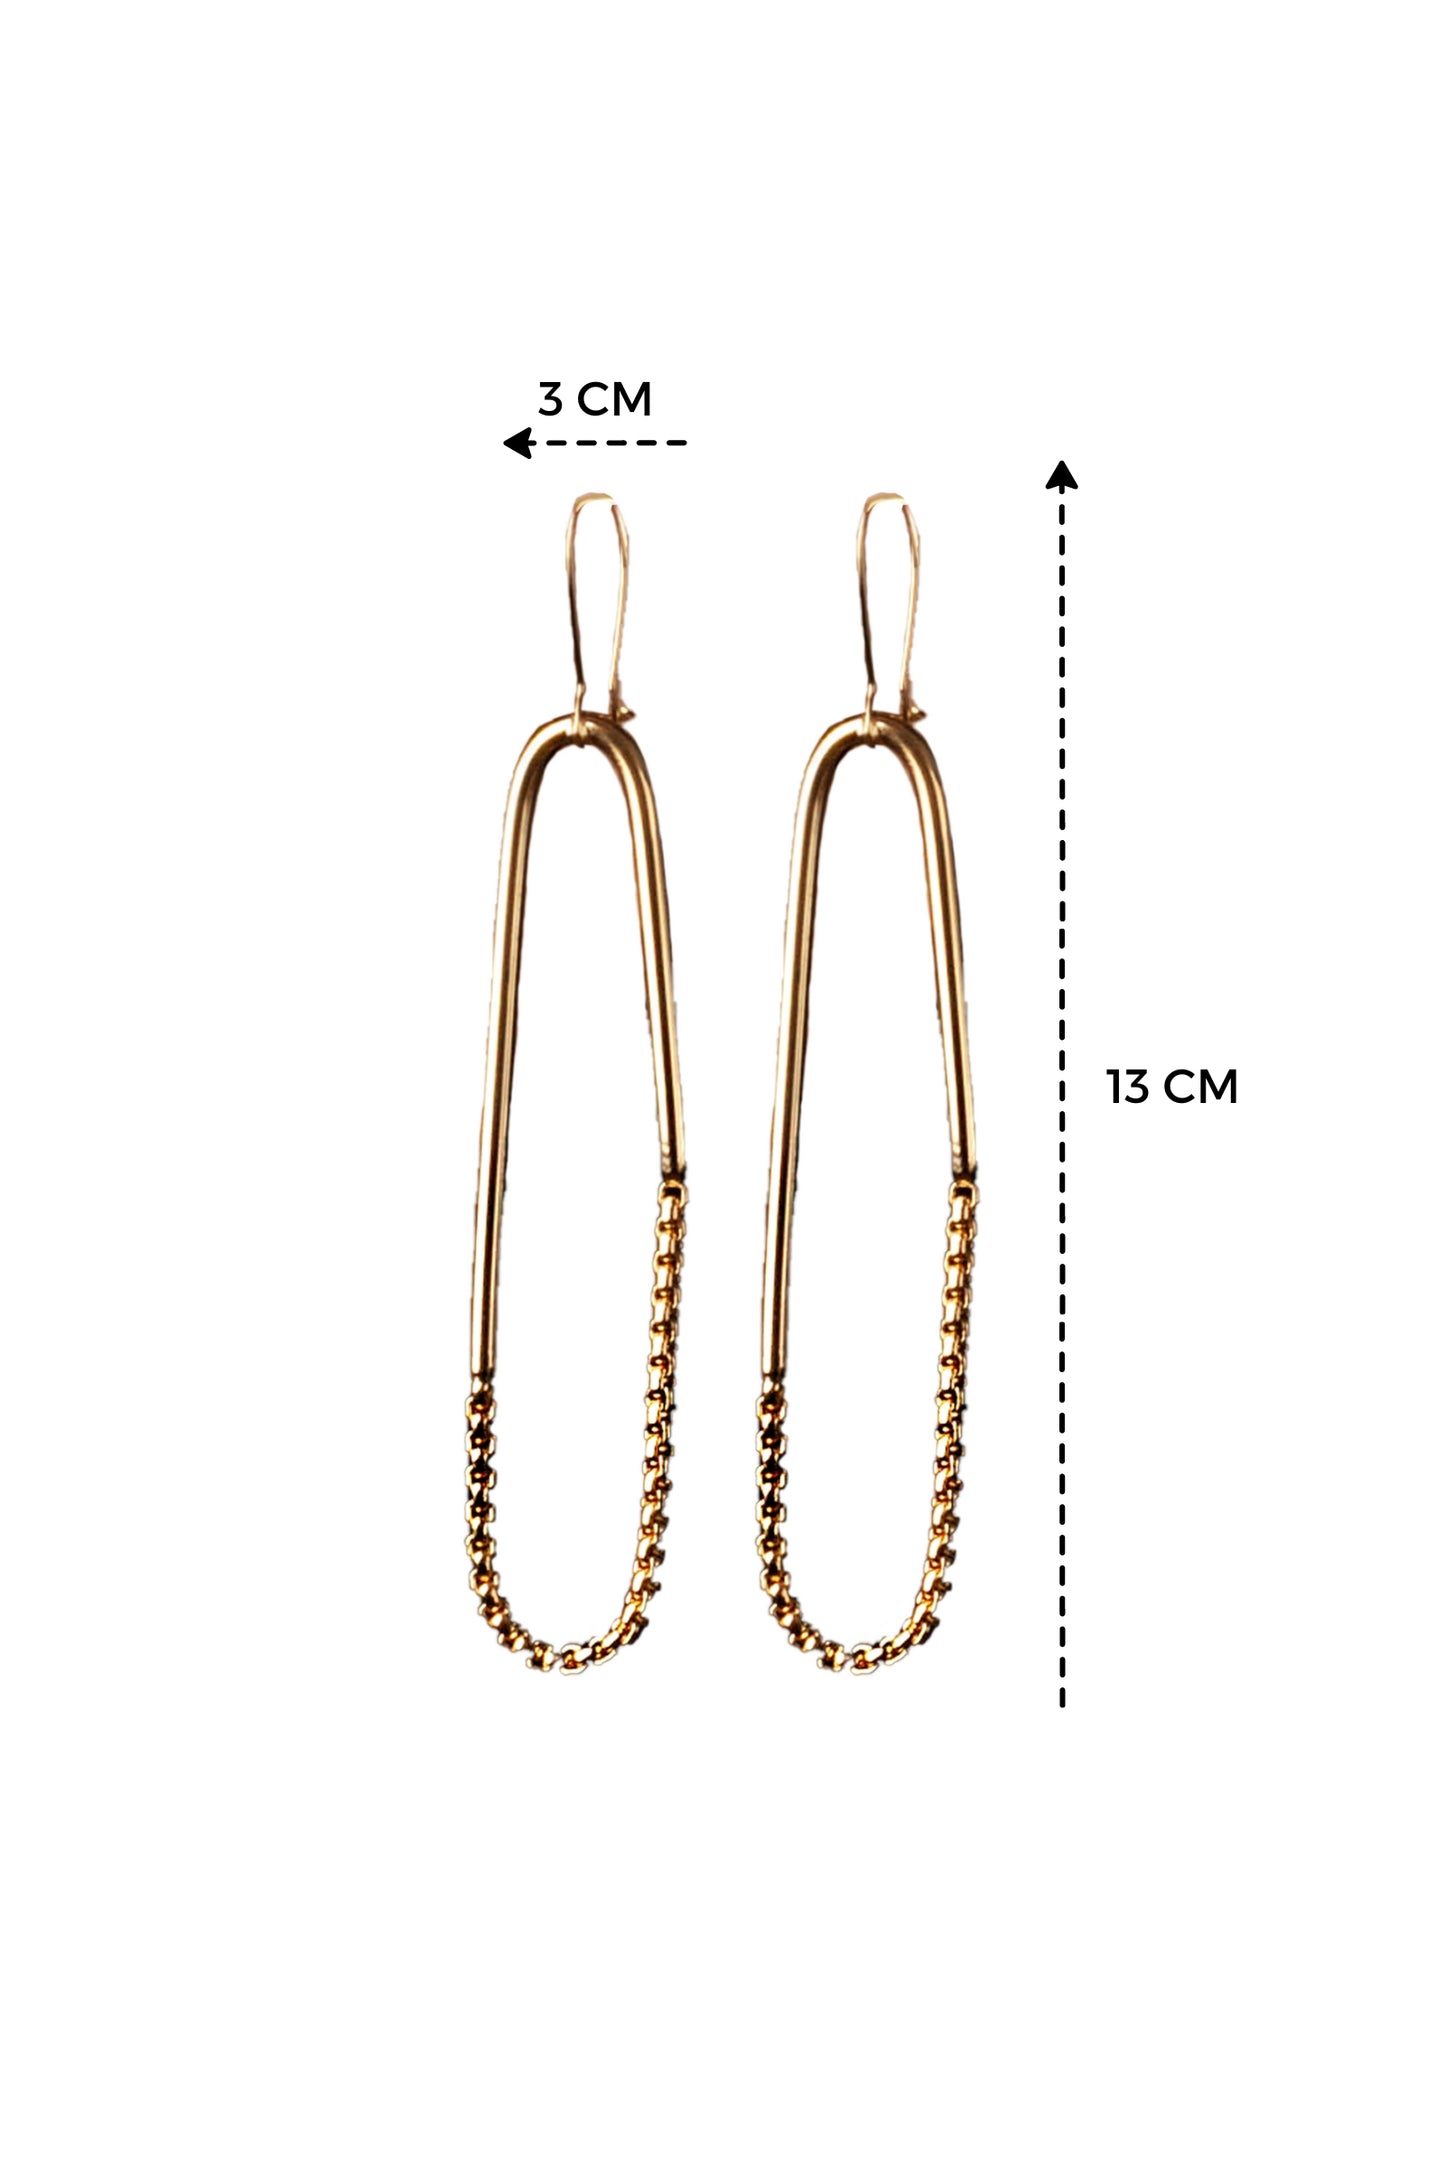 a pair of earrings with a chain hanging from it